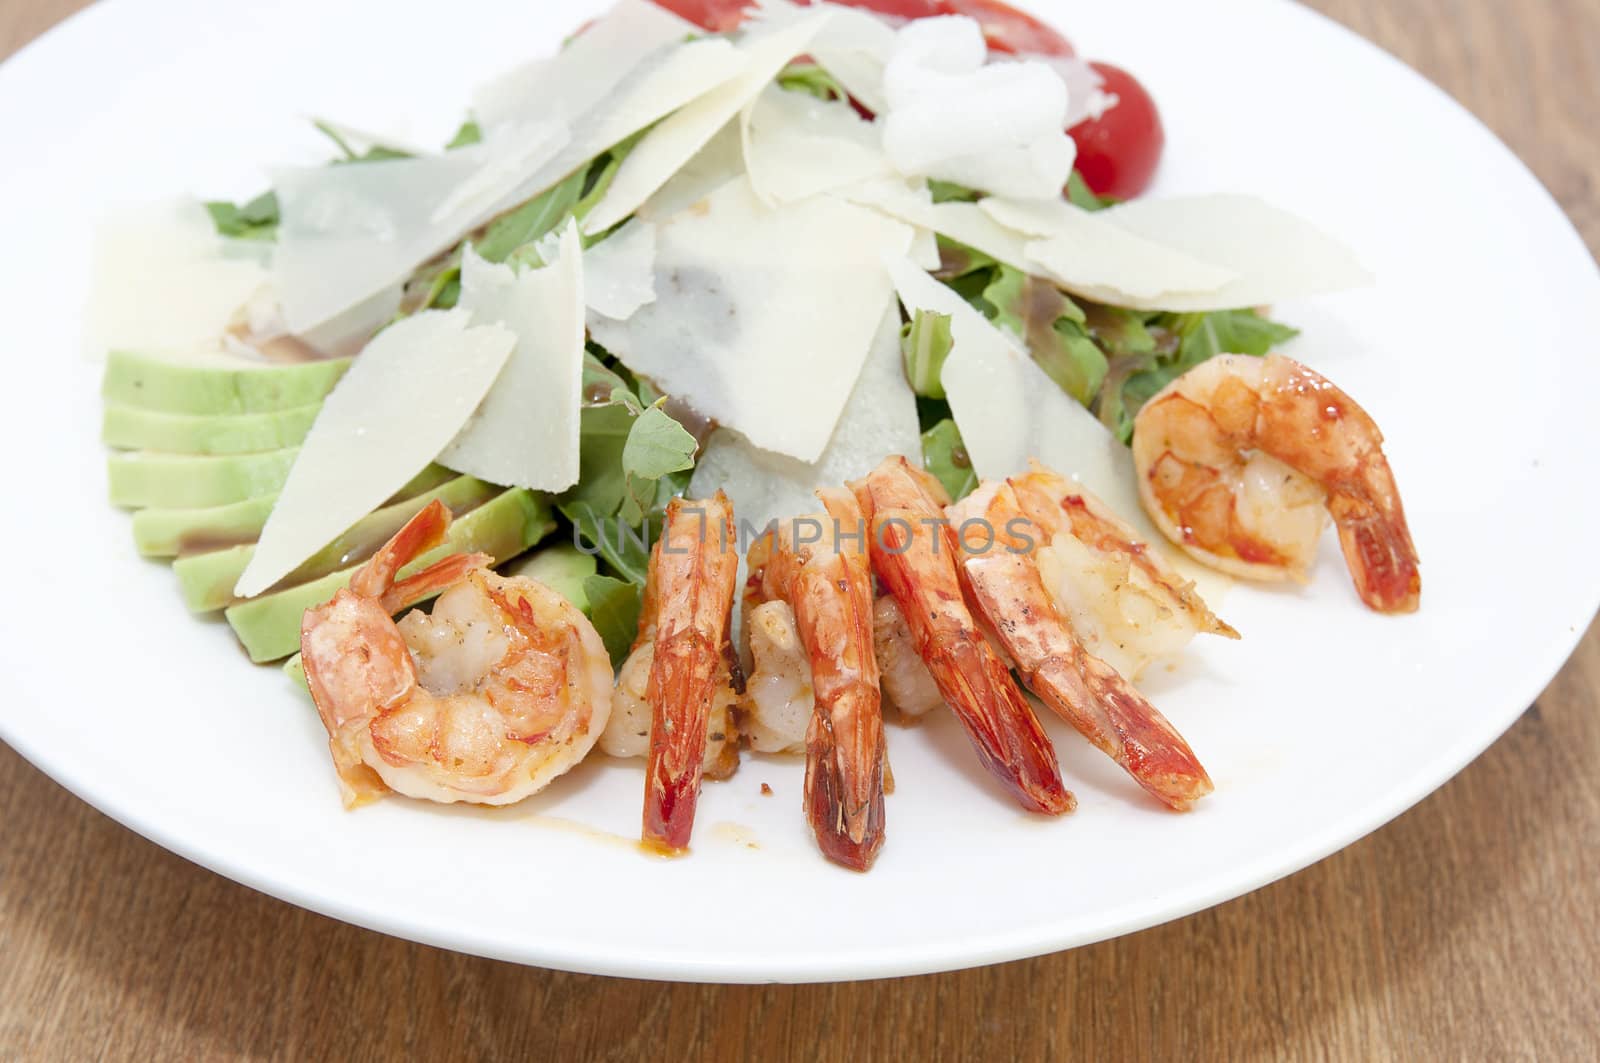 arugula dish with shrimp in a restaurant on the table